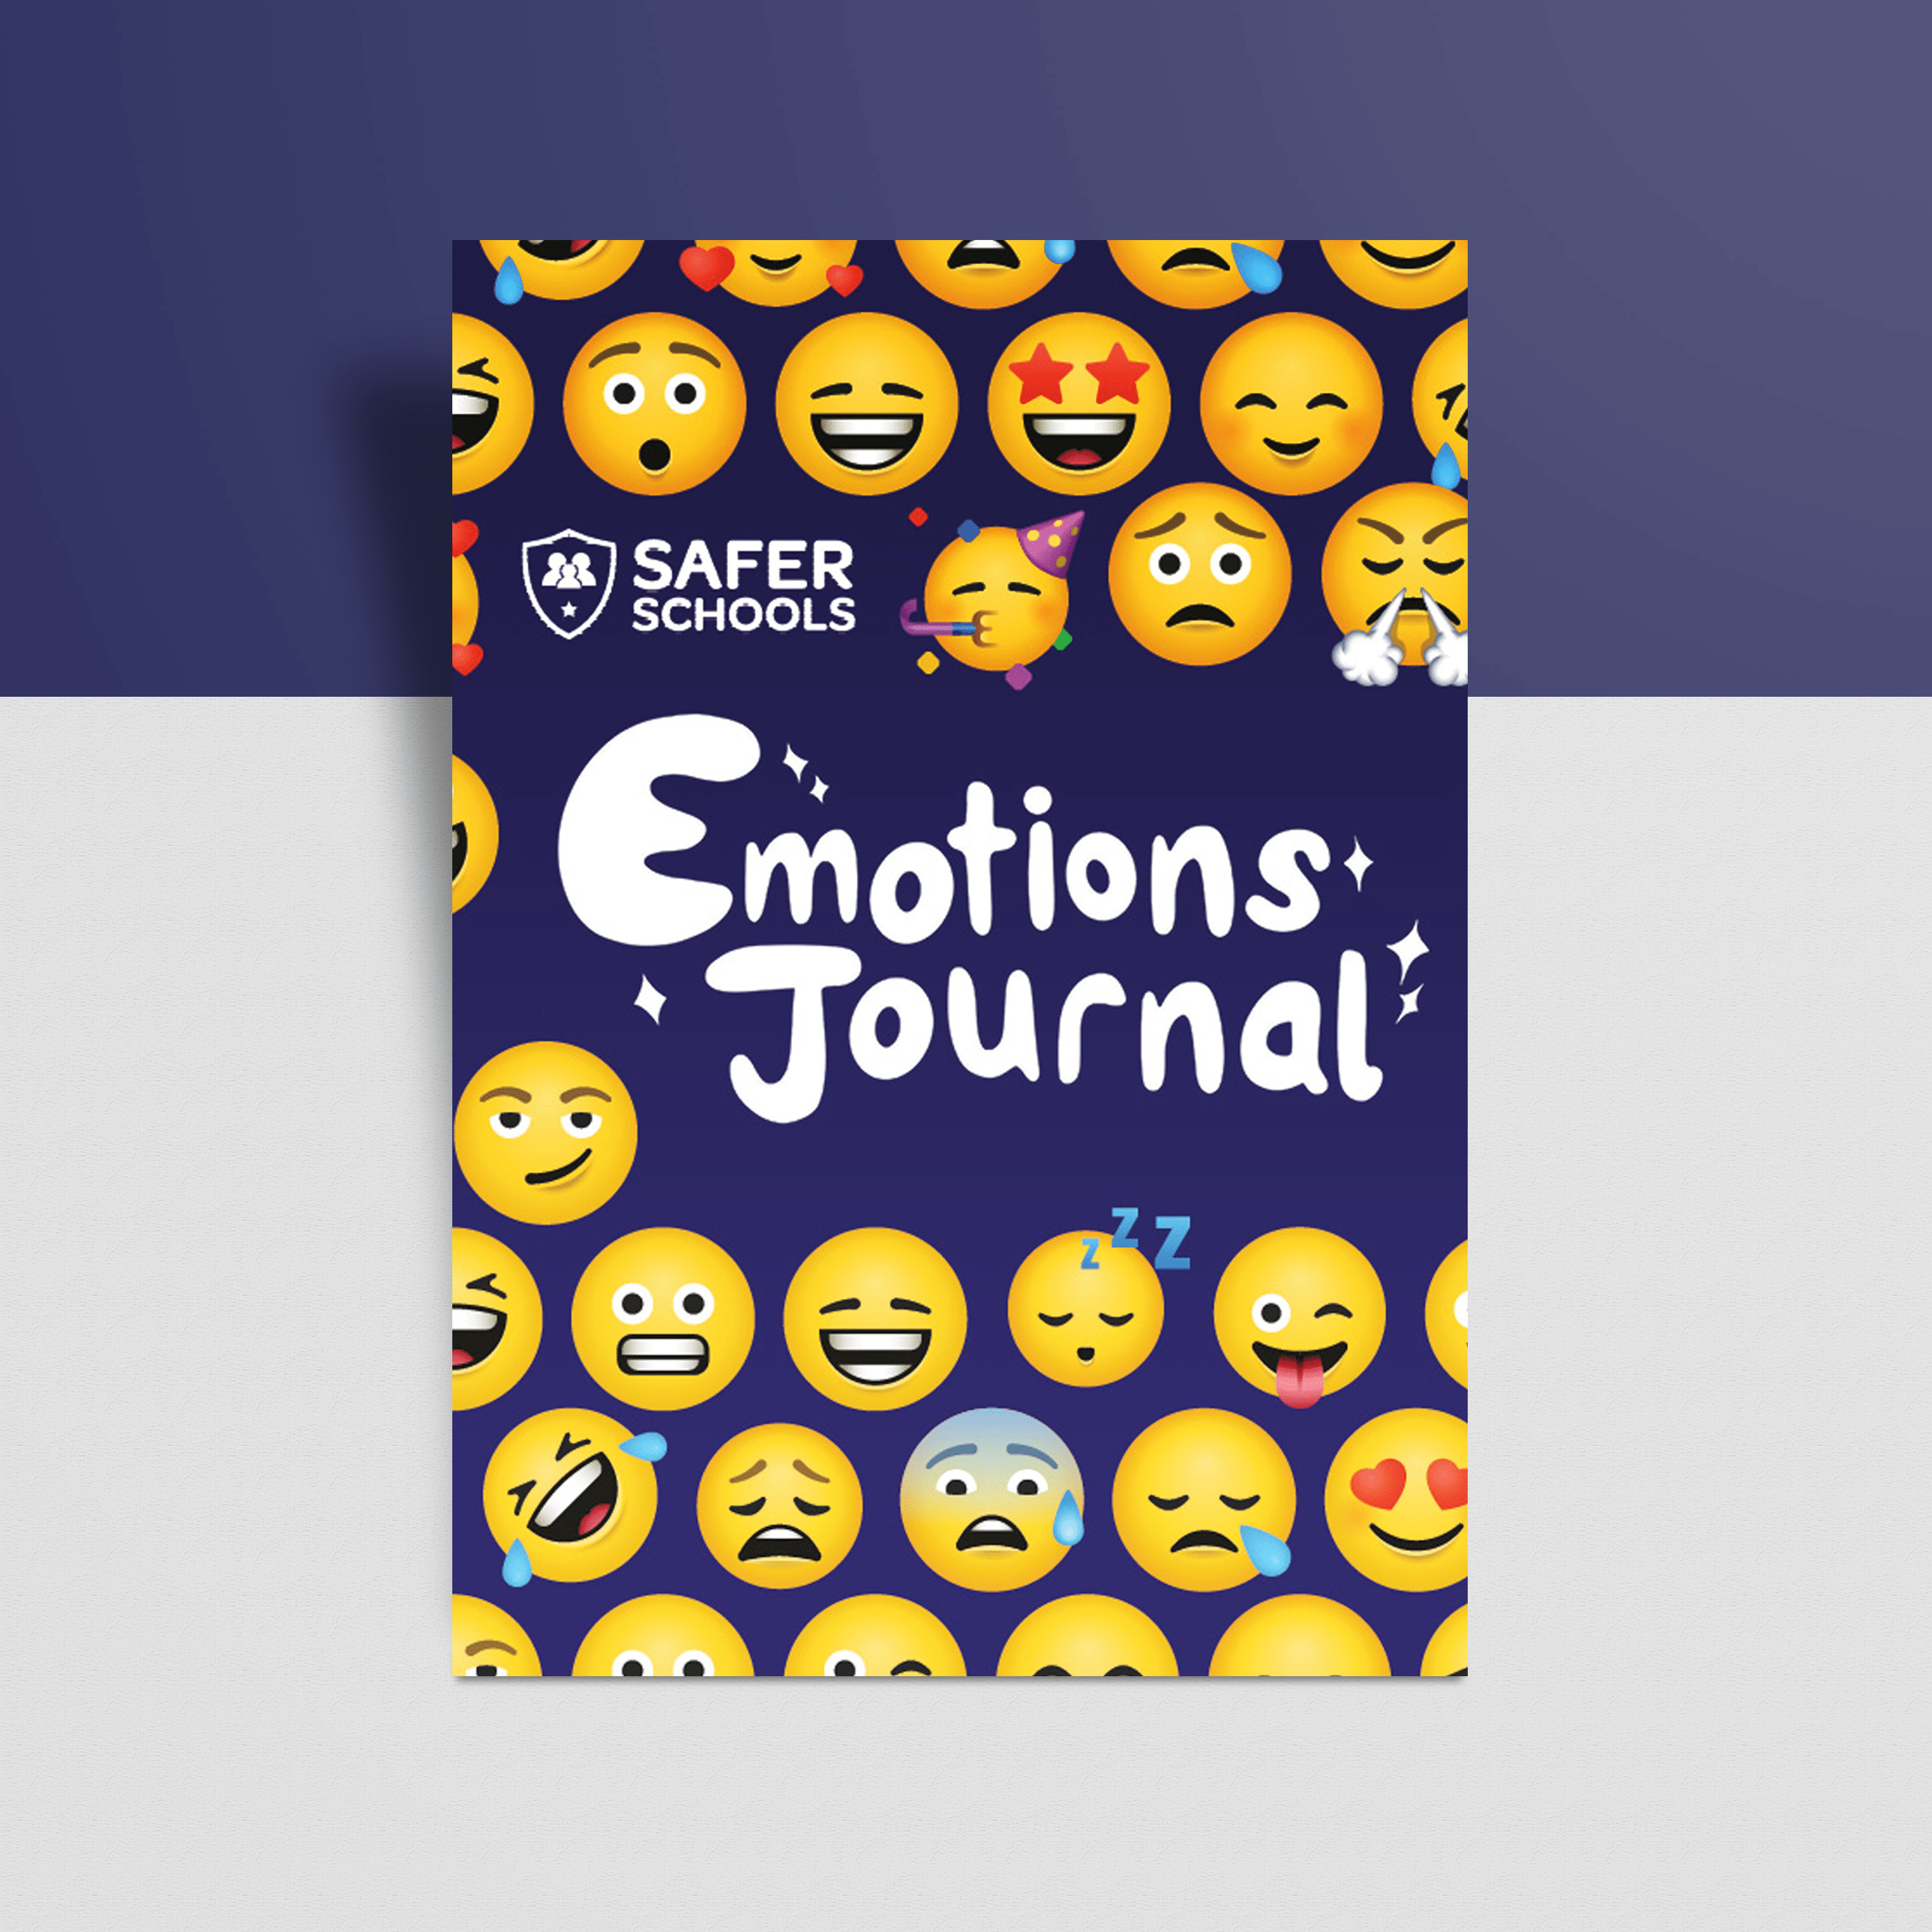 image of the emotions journal